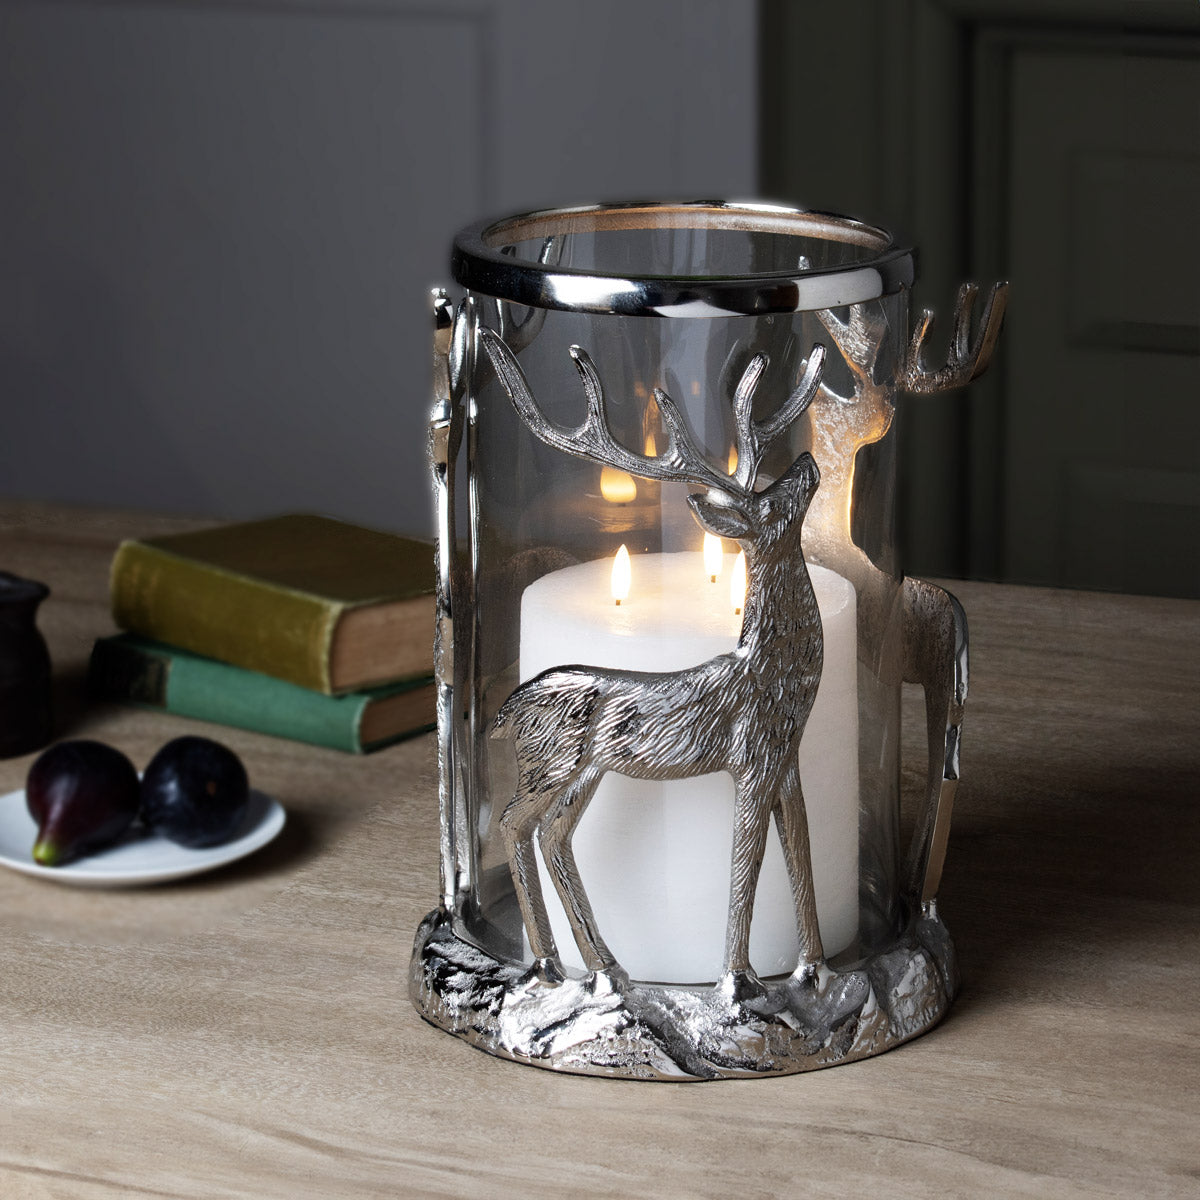 White LED 3 Wick Pillar Candle with Flickering Flame 15x15cm